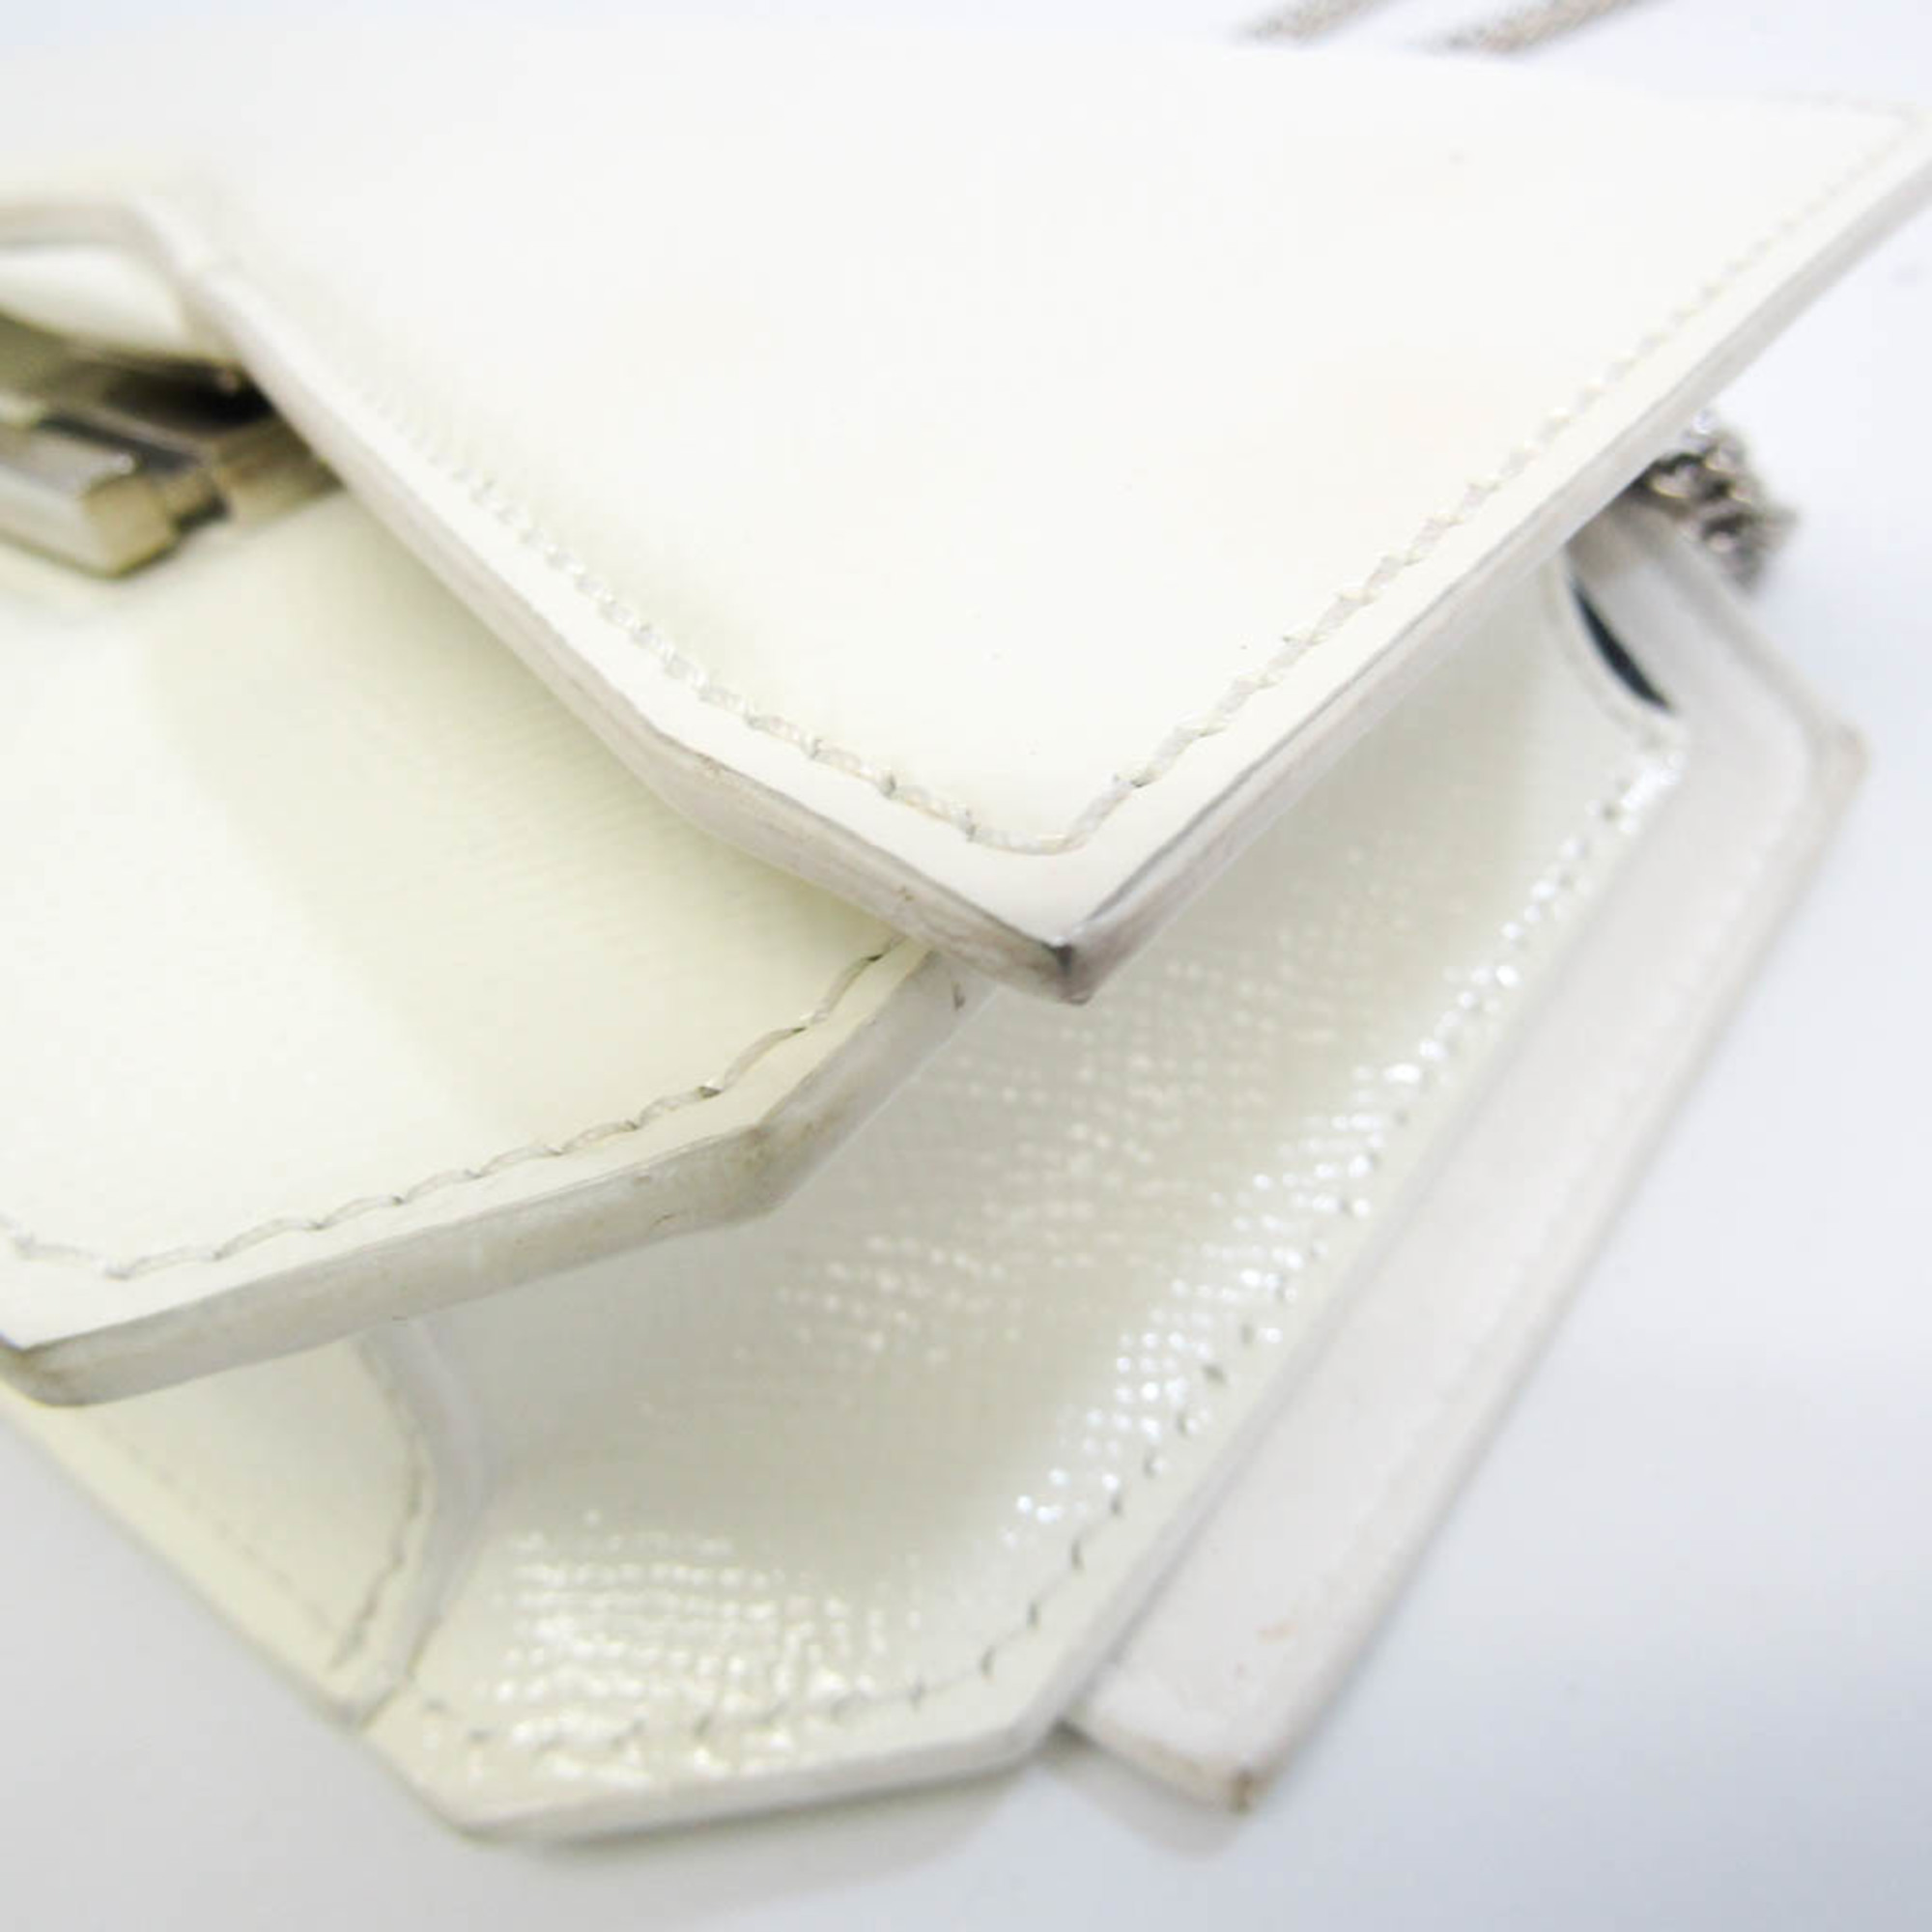 Givenchy Bow Cut Women's Leather Shoulder Bag Off-white